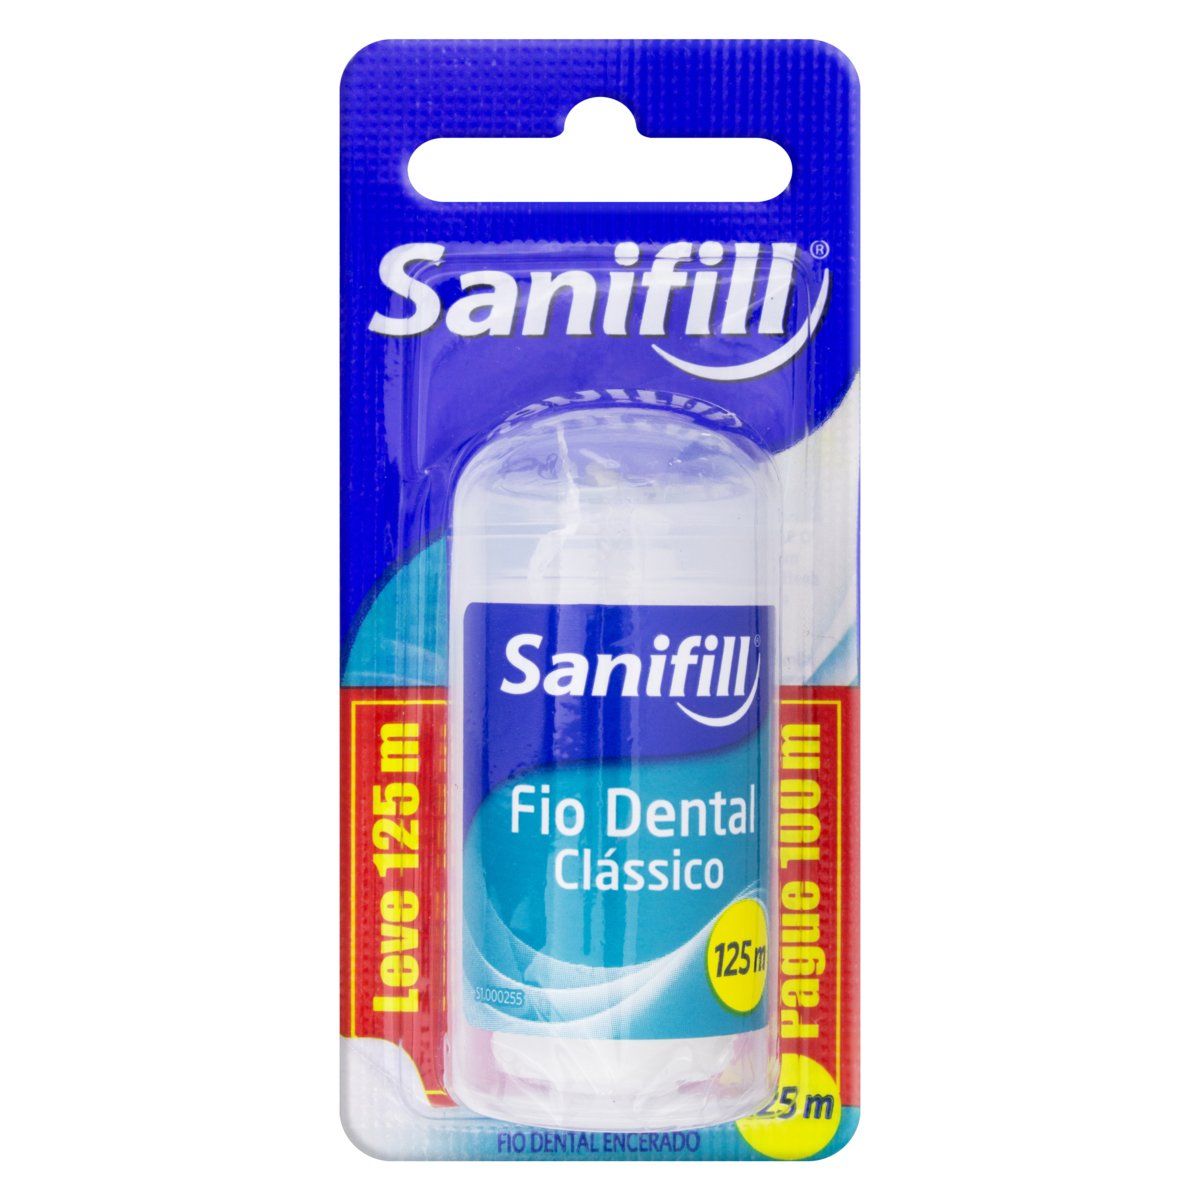 Fio Dental Clássico Sanifill Blister Leve 125m Pague 100m image number 0